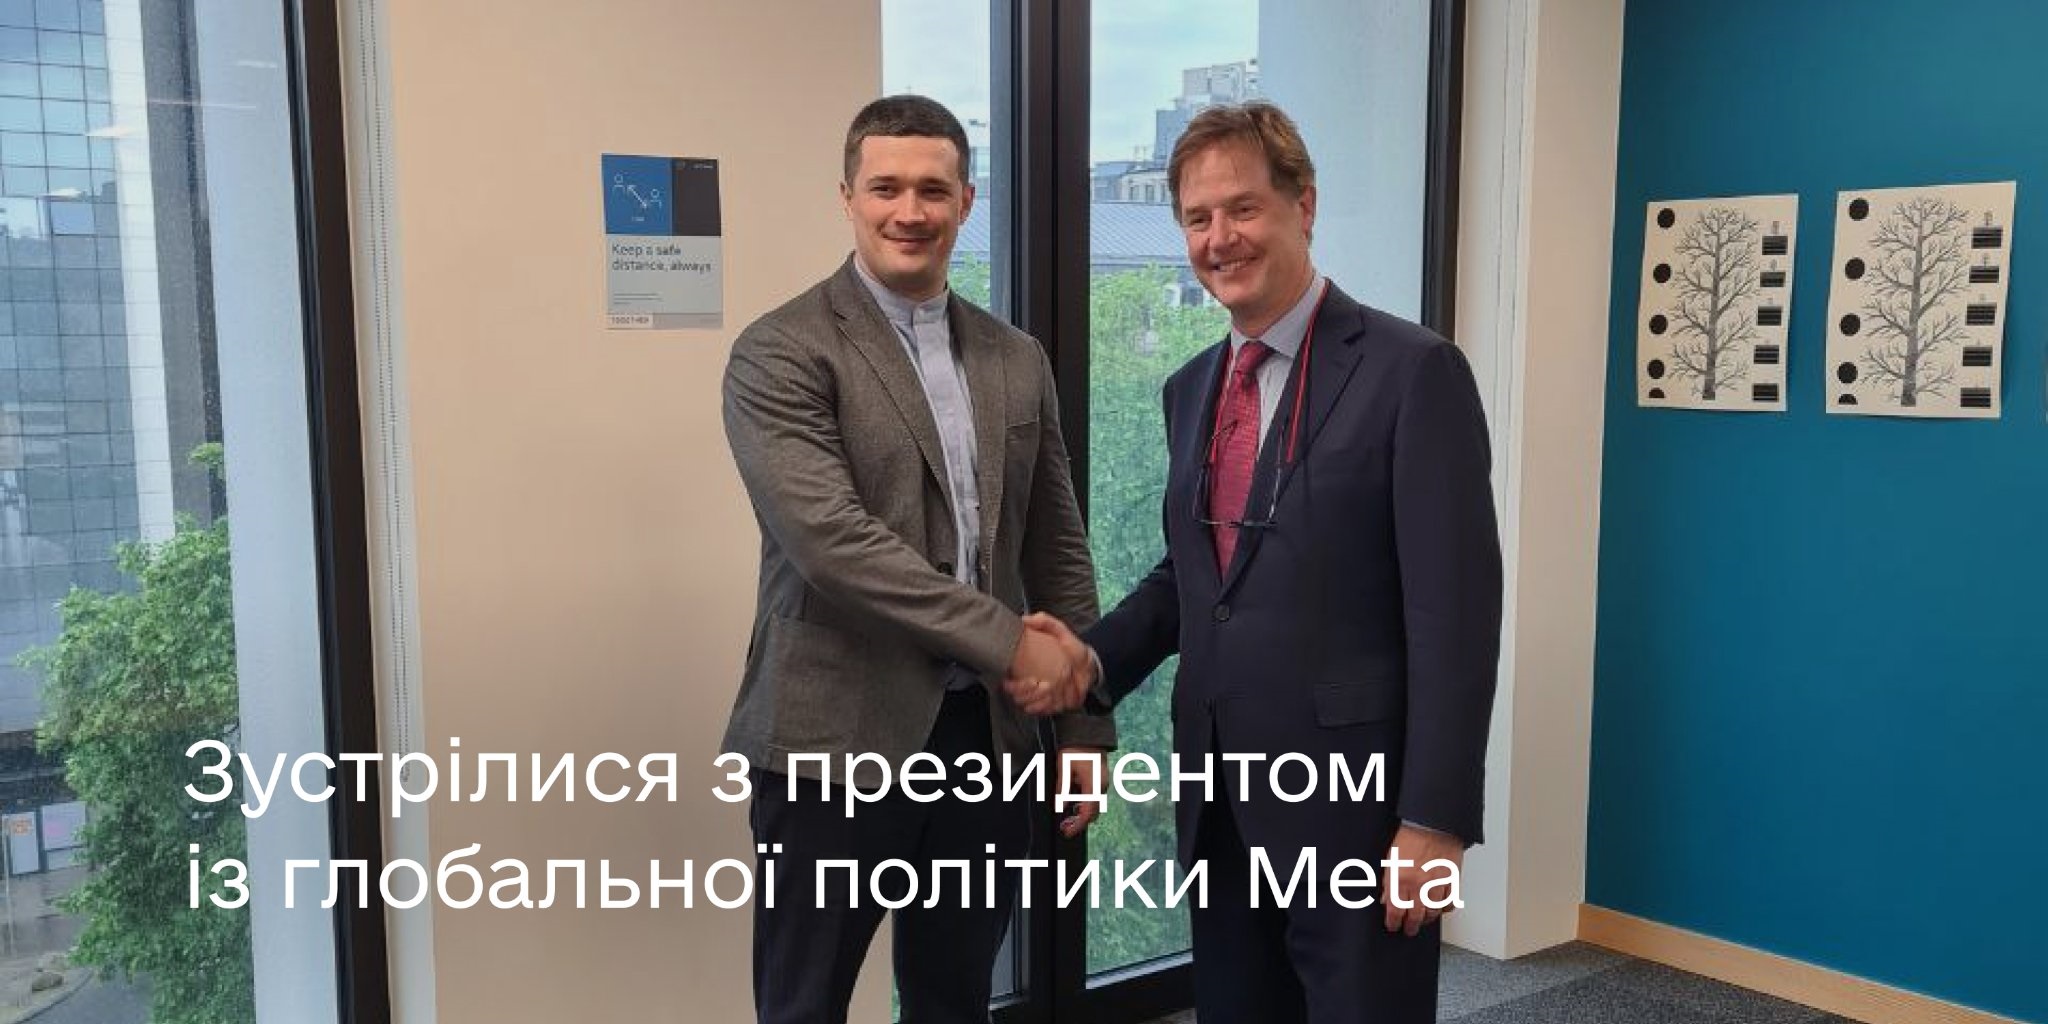 Opening a Facebook office in Ukraine and blocking Azov in social networks: Fedorov spoke about the meeting with the president of Meta